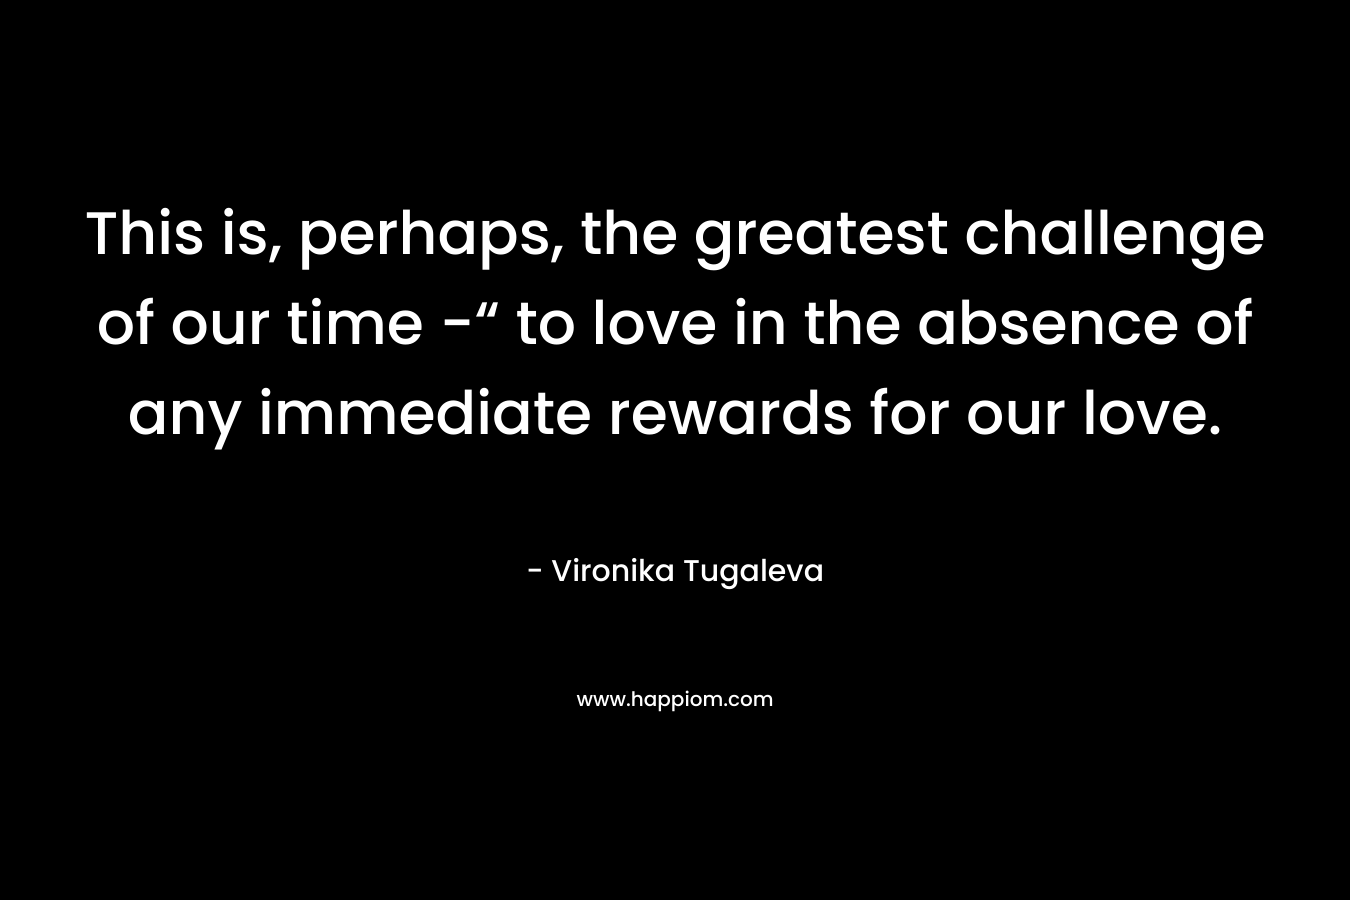 This is, perhaps, the greatest challenge of our time -“ to love in the absence of any immediate rewards for our love.